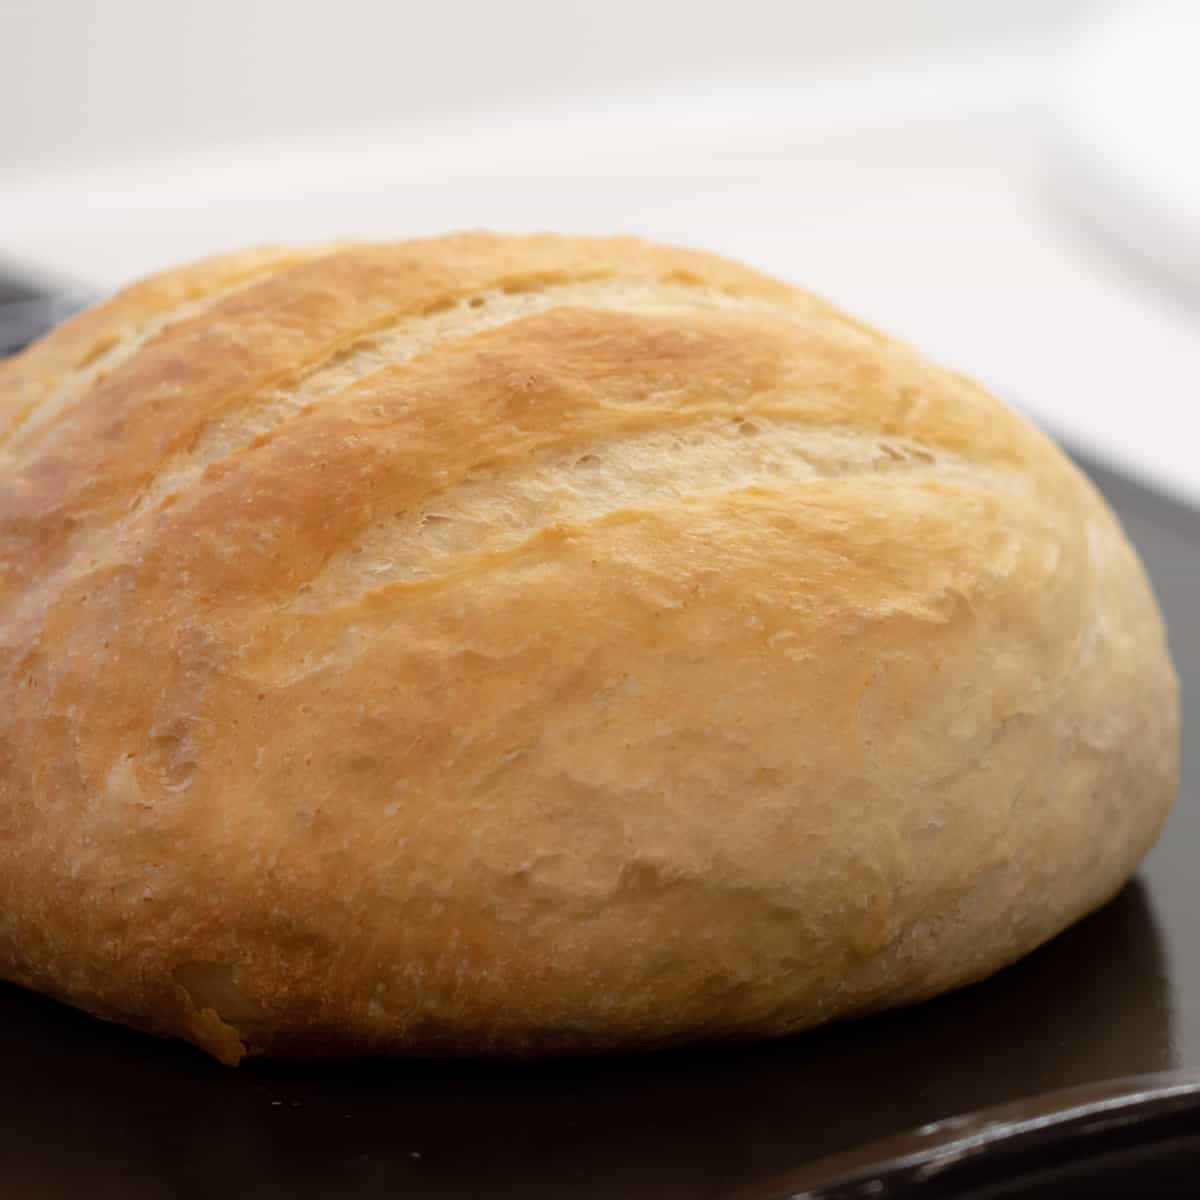 A fresh loaf of round artisan bread.